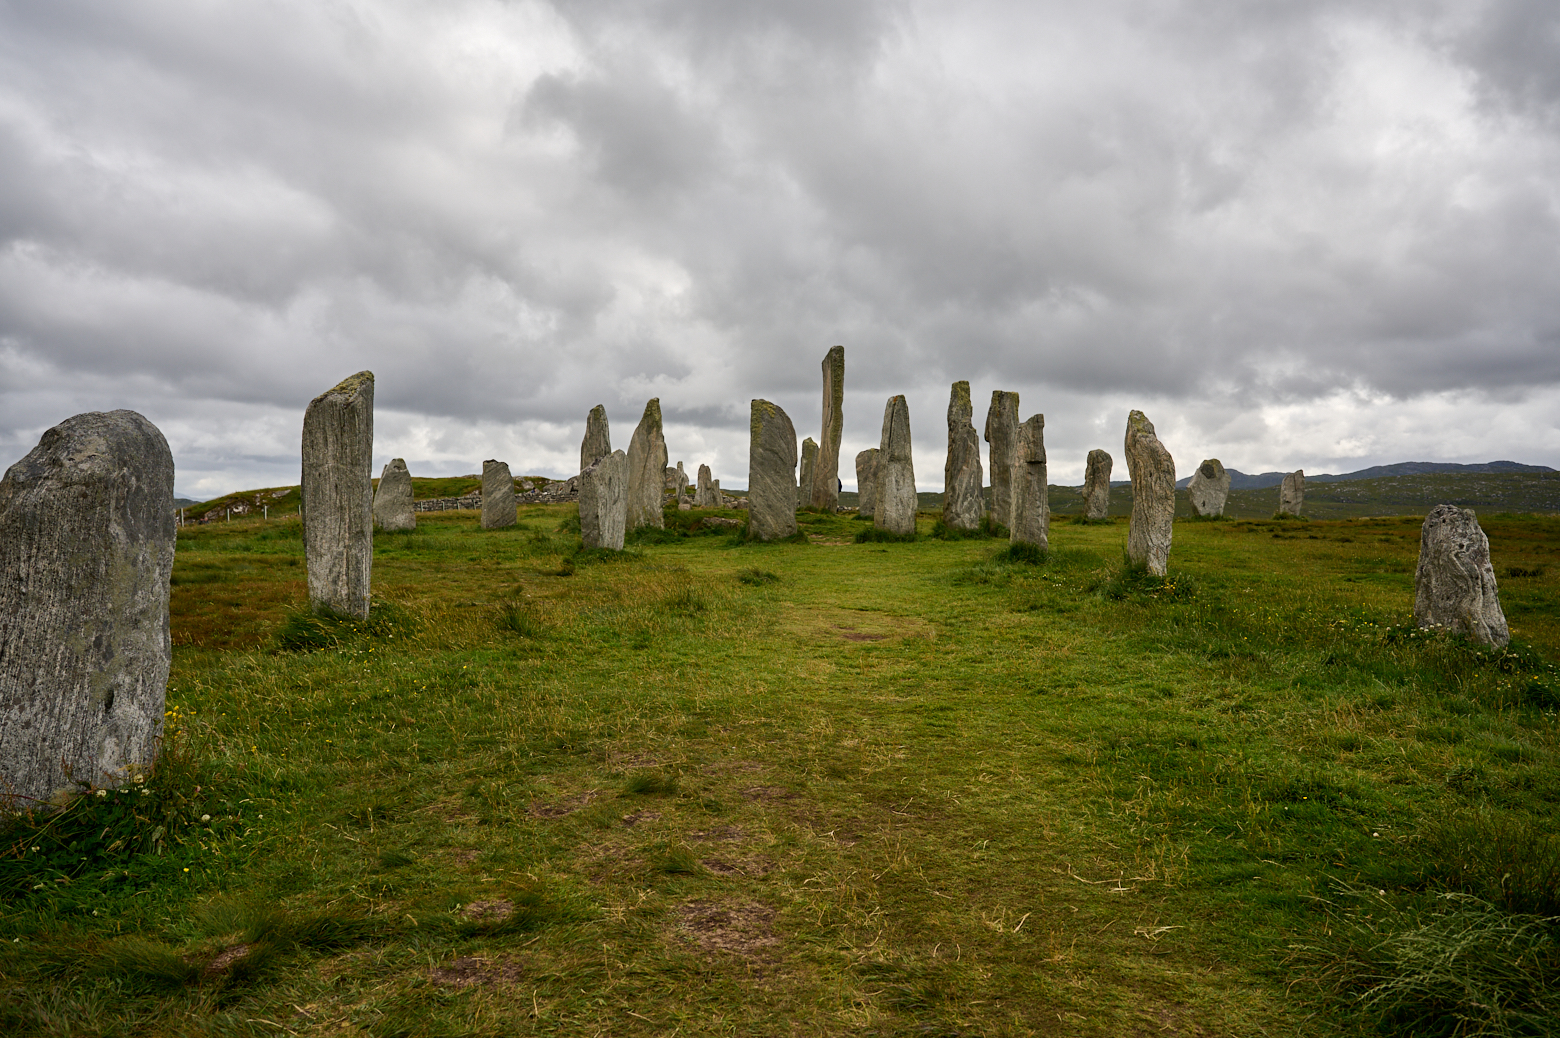 Visiting the standing stones in Callanish, Isle of Lewis